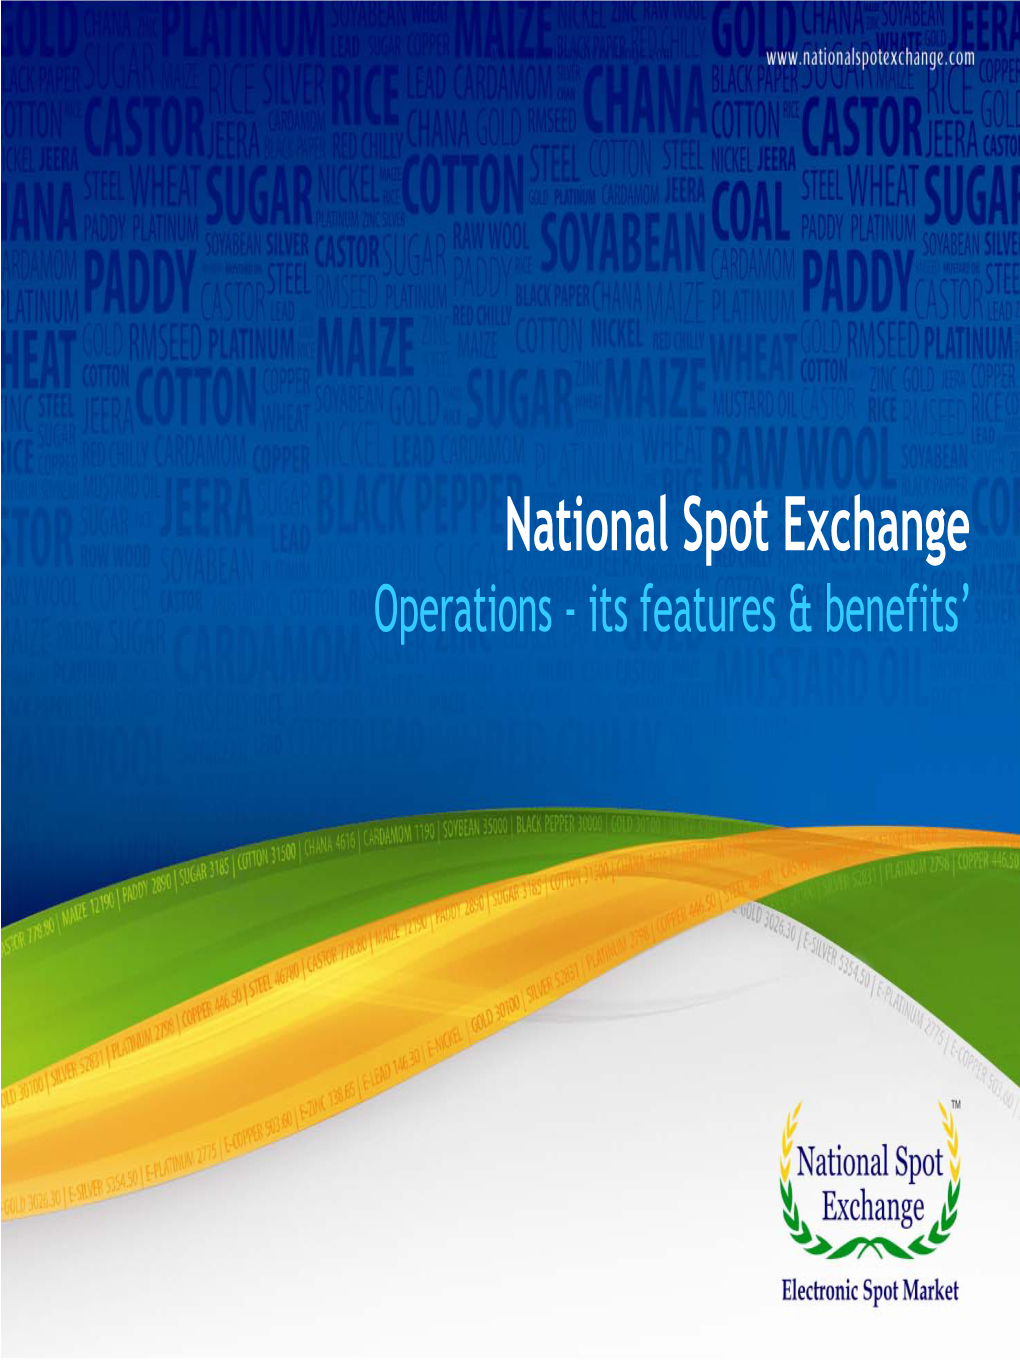 National Spot Exchange: Services